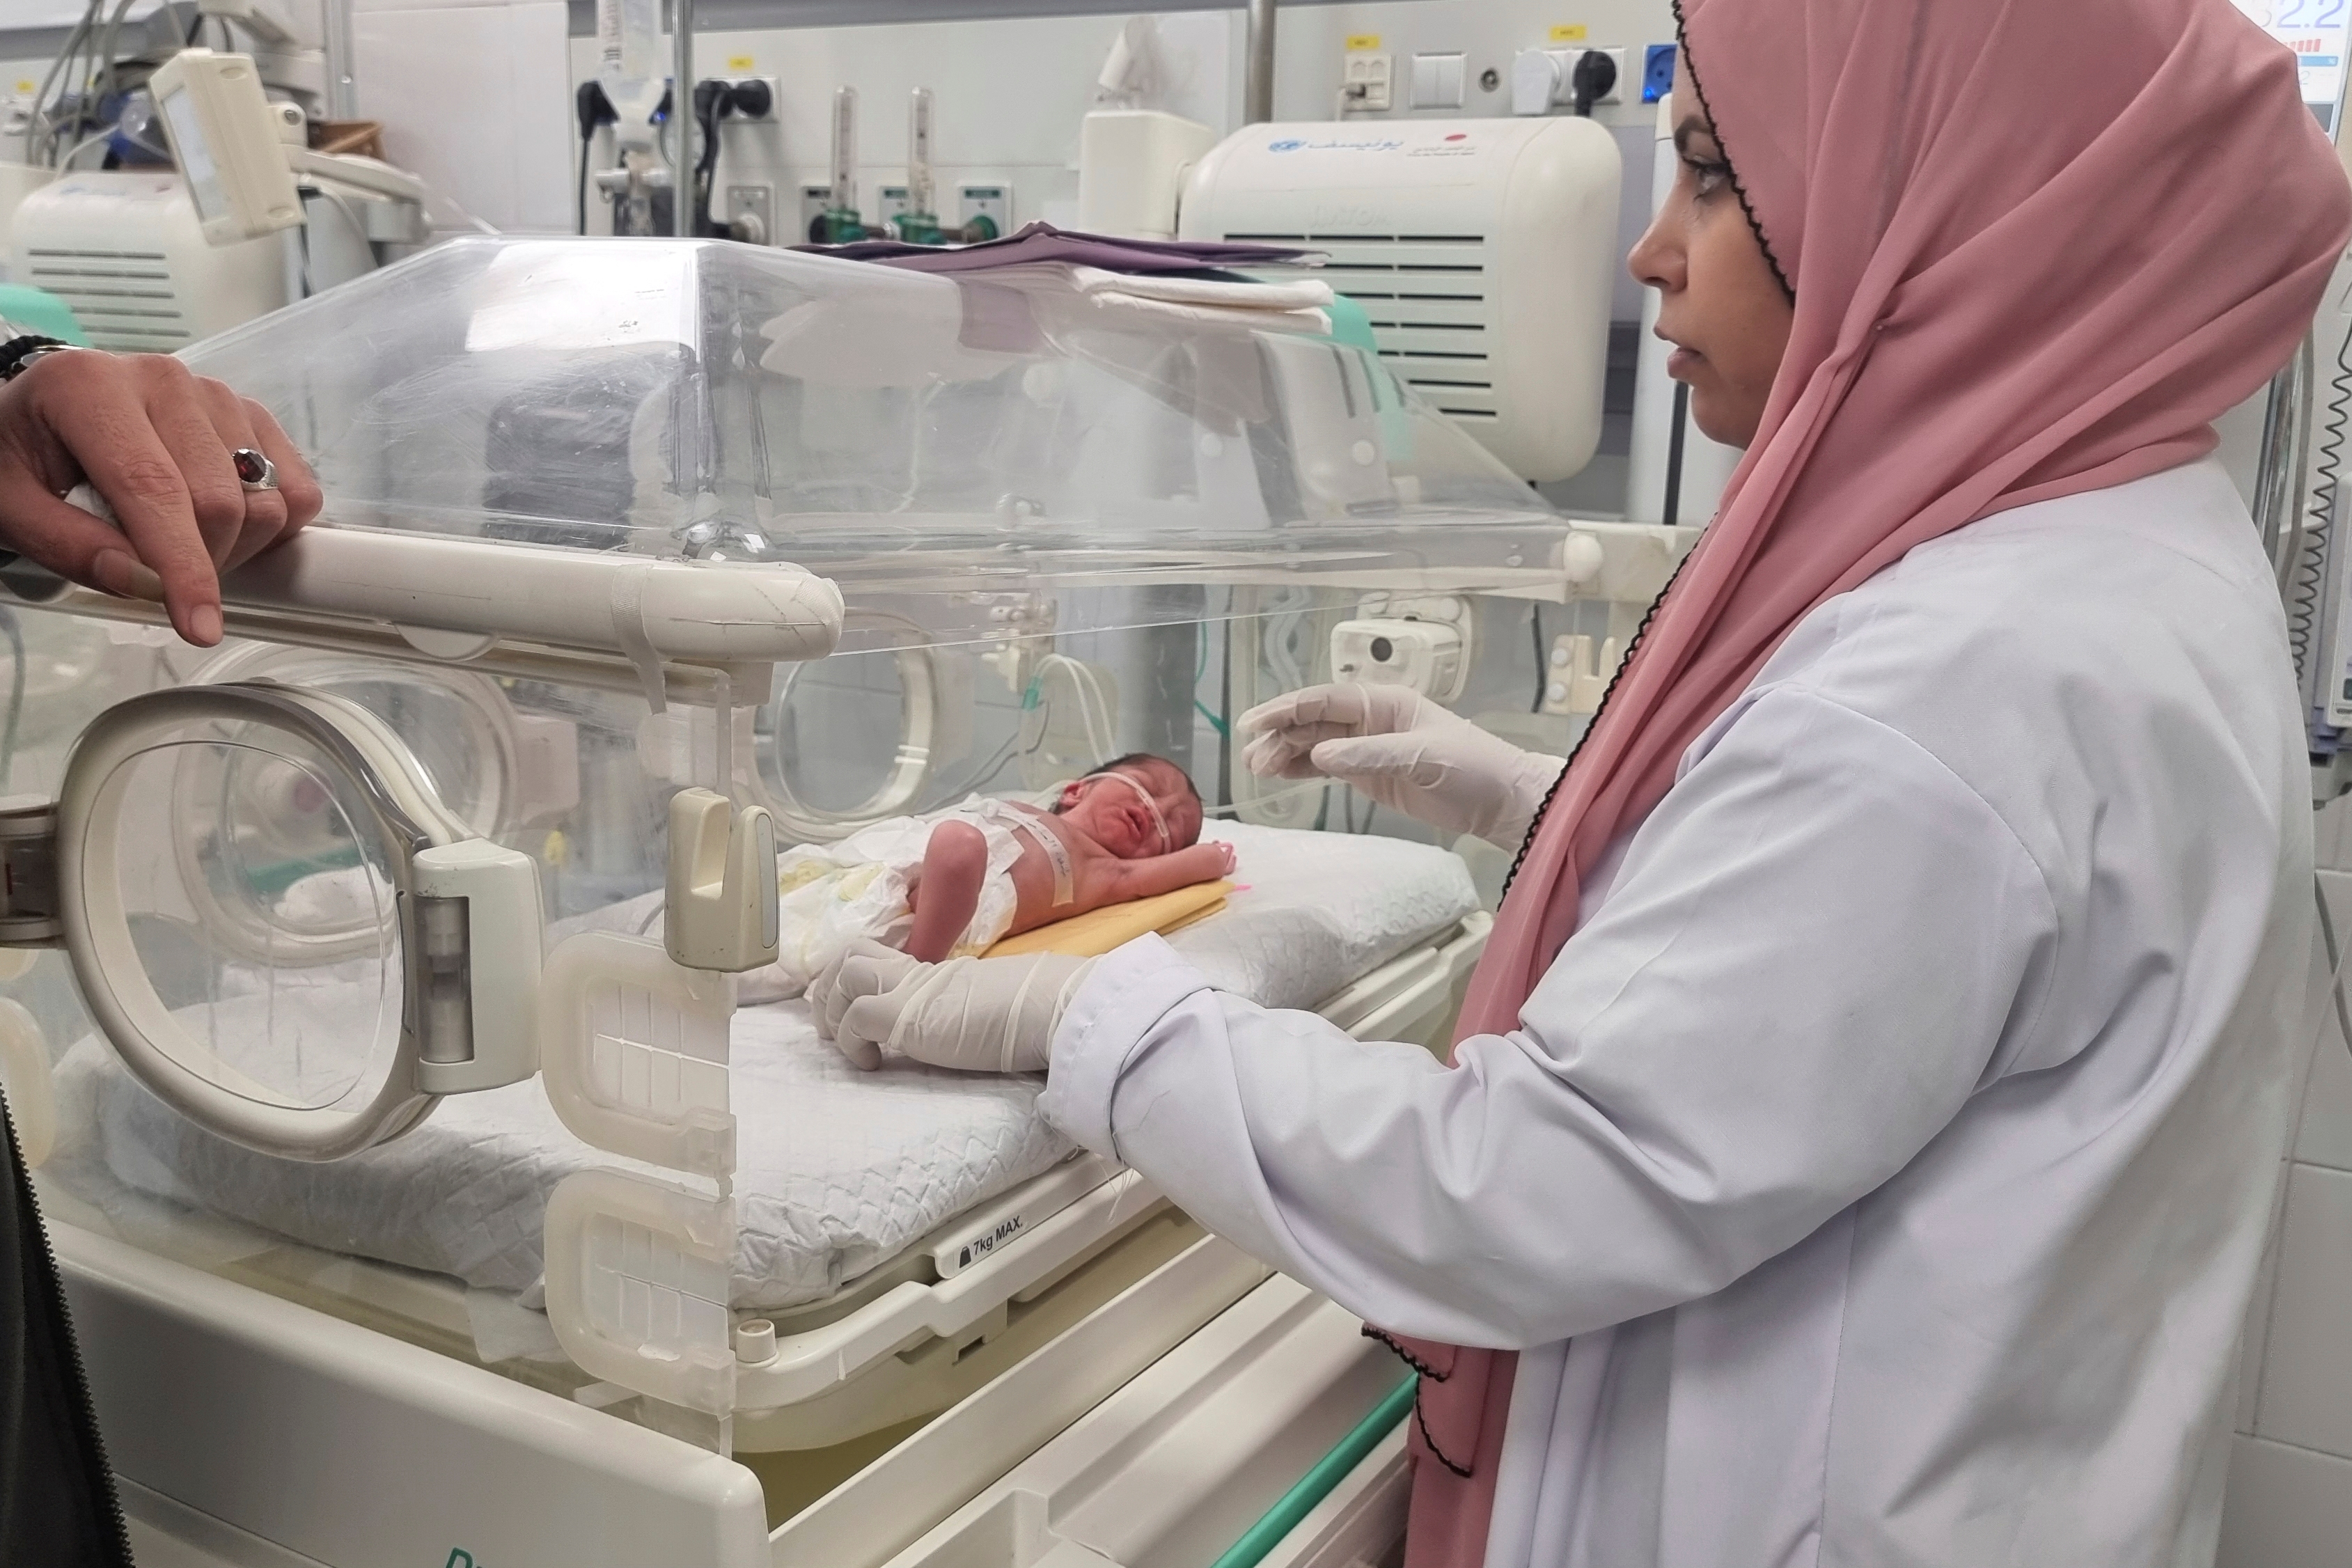 Palestinian Baby Is Born As Orphan